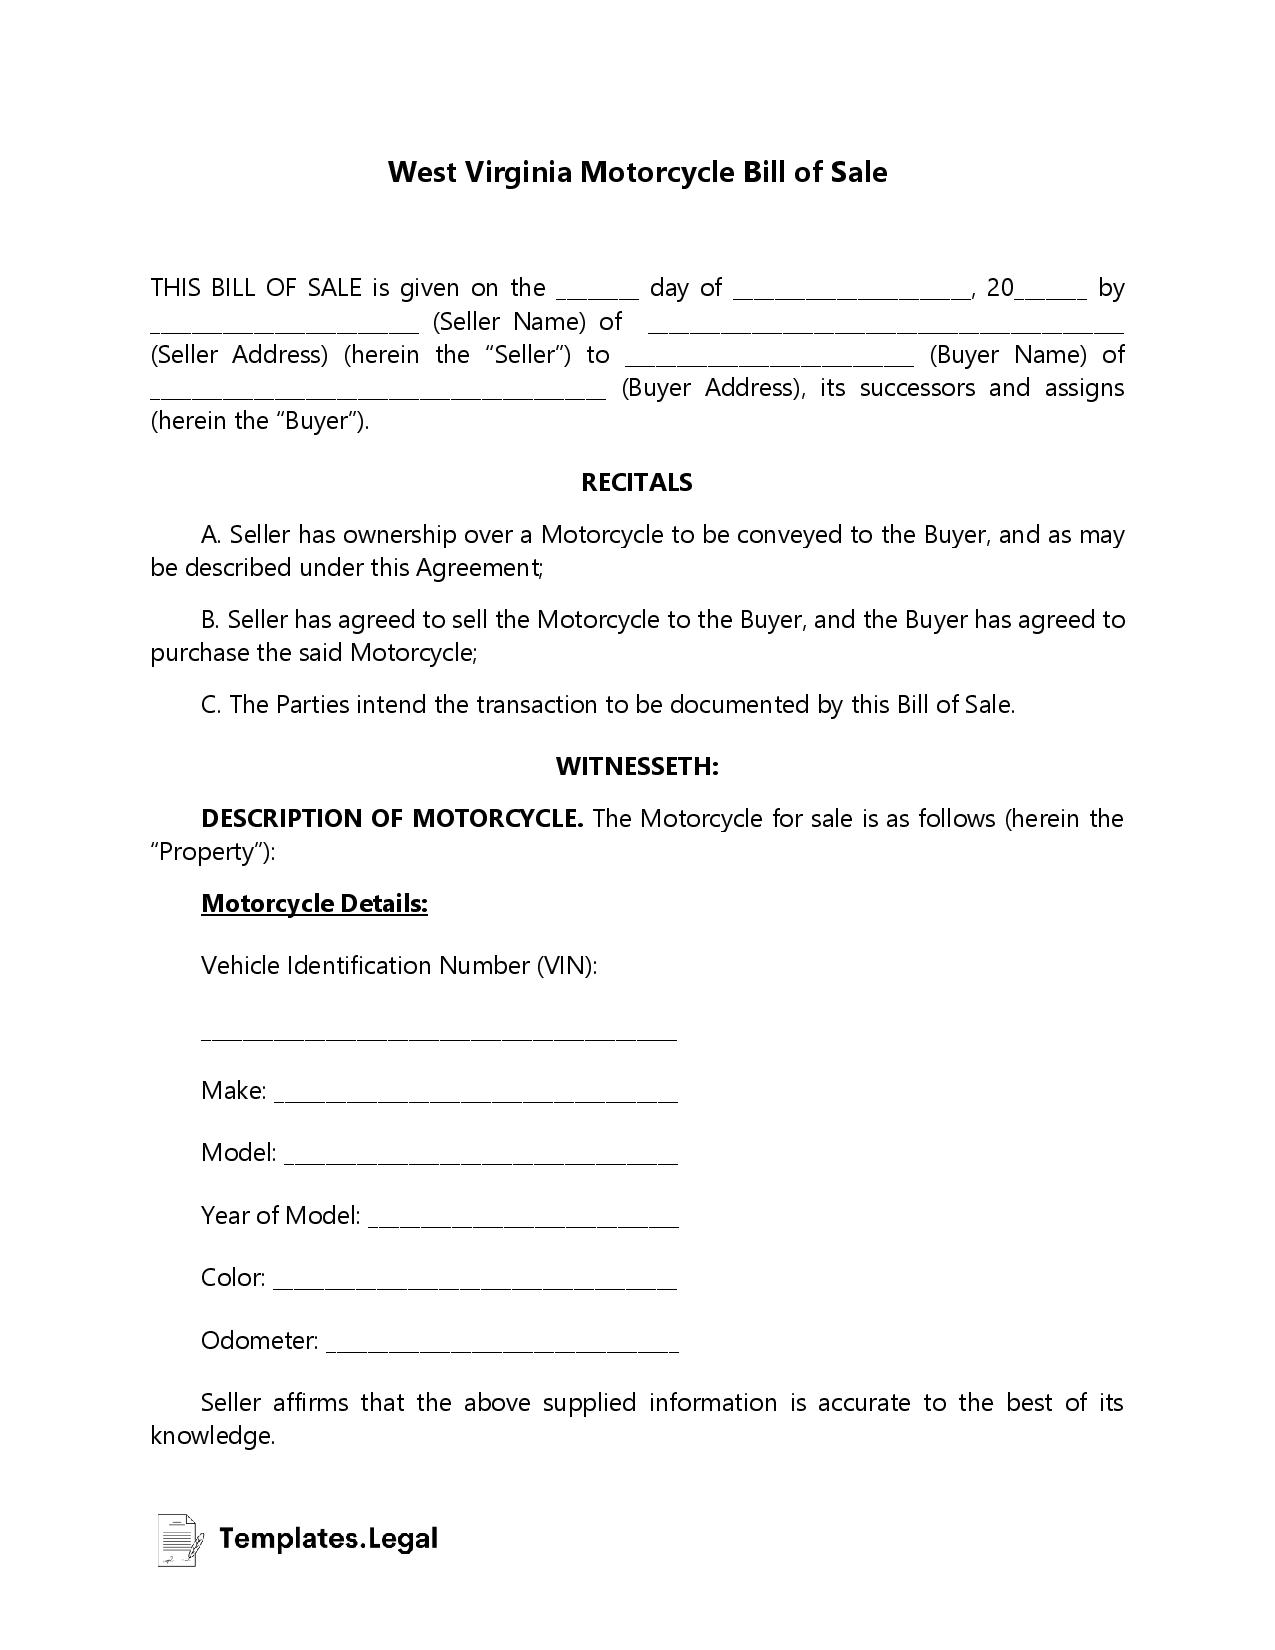 West Virginia Motorcycle Bill of Sale - Templates.Legal